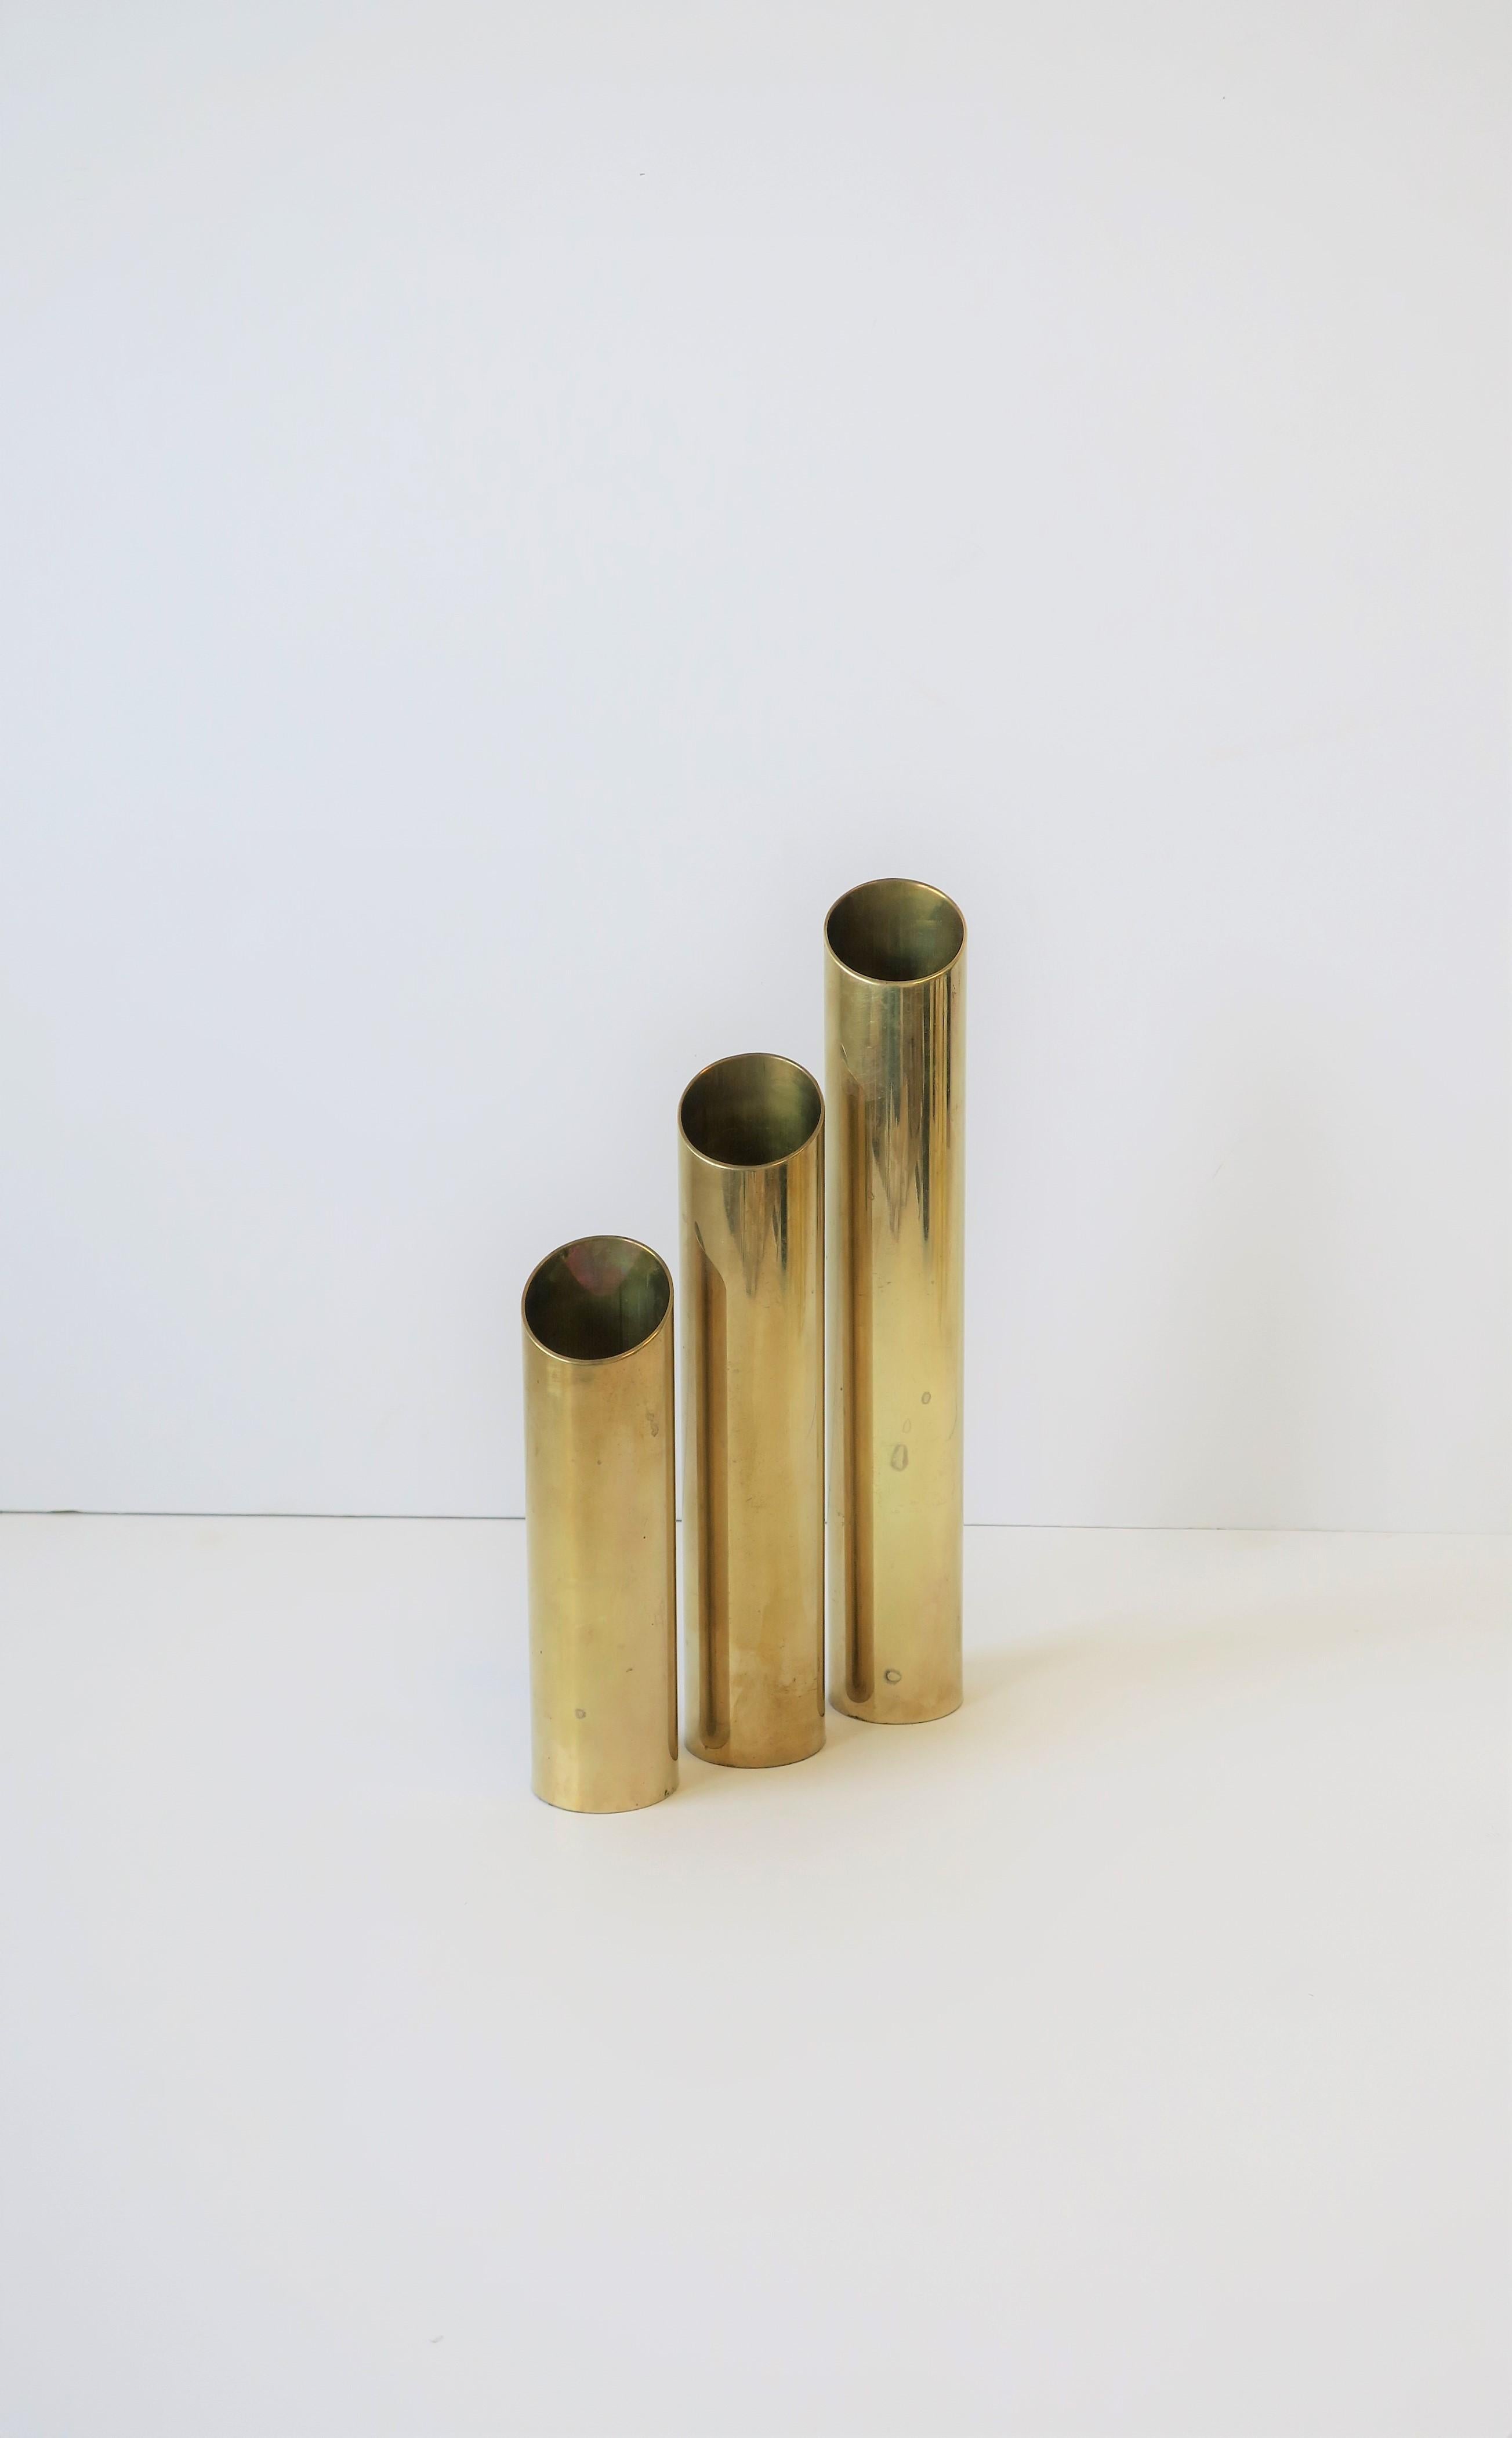 Late 20th Century Modern Brass Cylindrical Sculptures, ca. 1970s